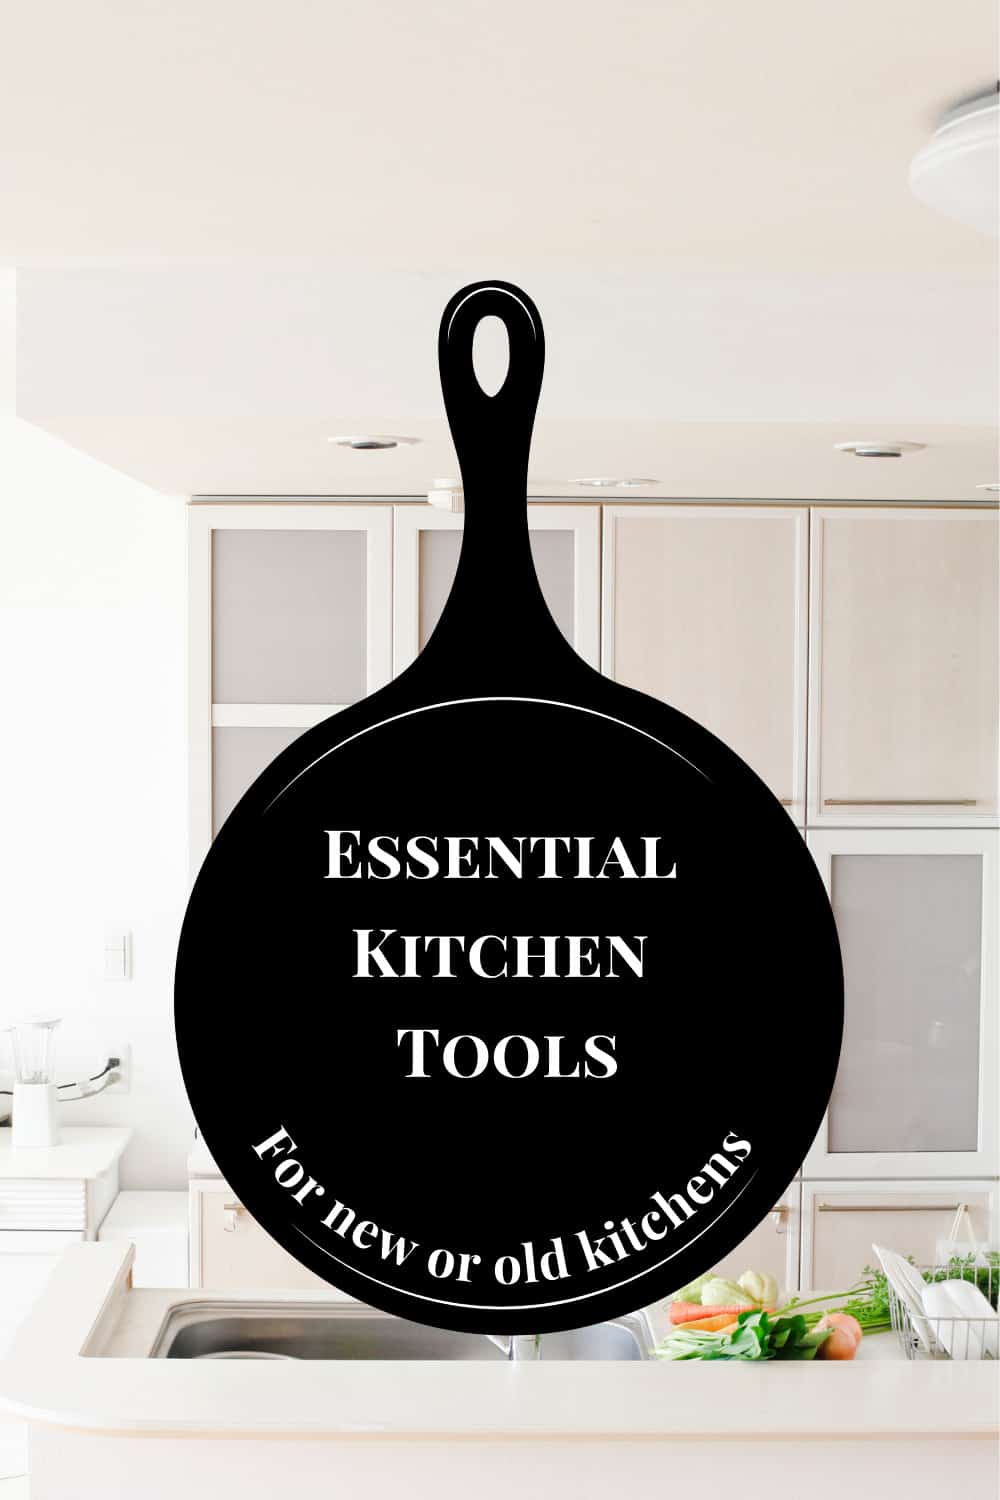 Must-have essential kitchen tools for new or old kitchens.